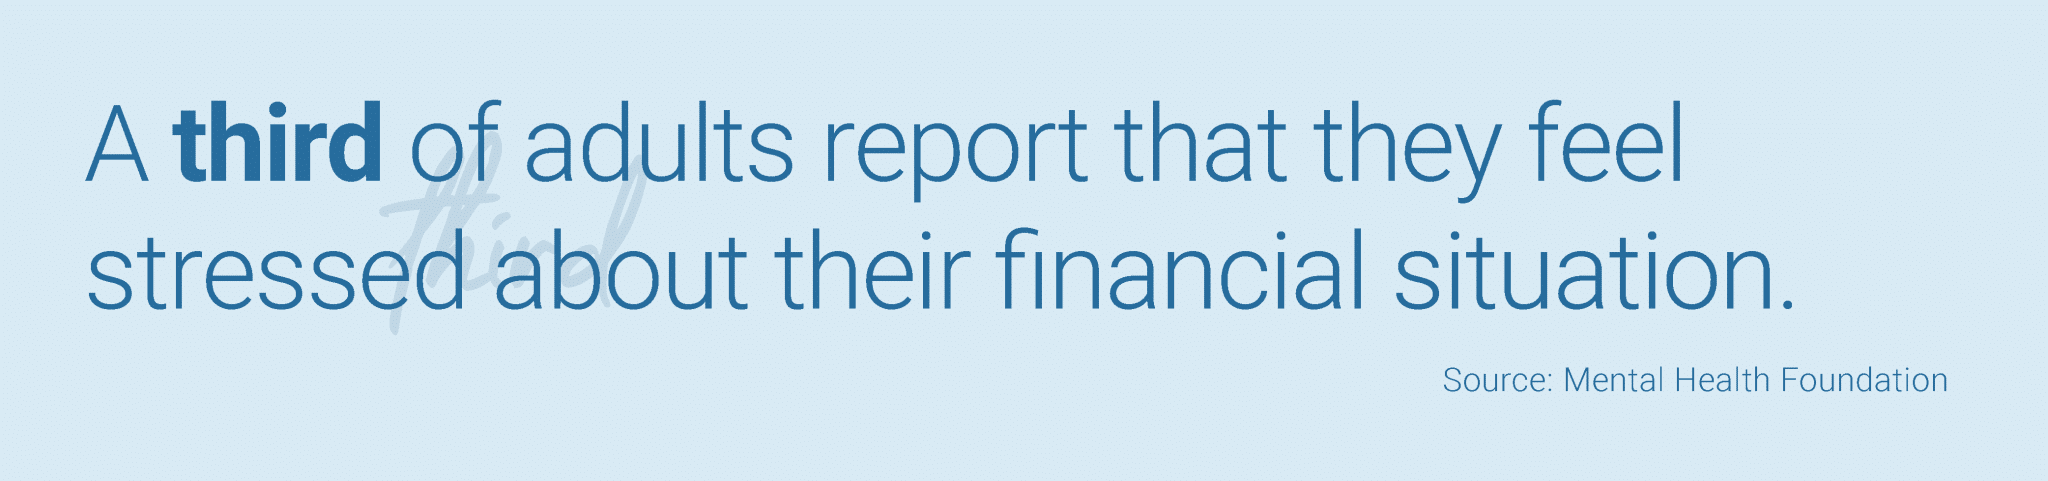 A third of adults report that they feel stressed about their financial situation. Source: Mental Health Foundation